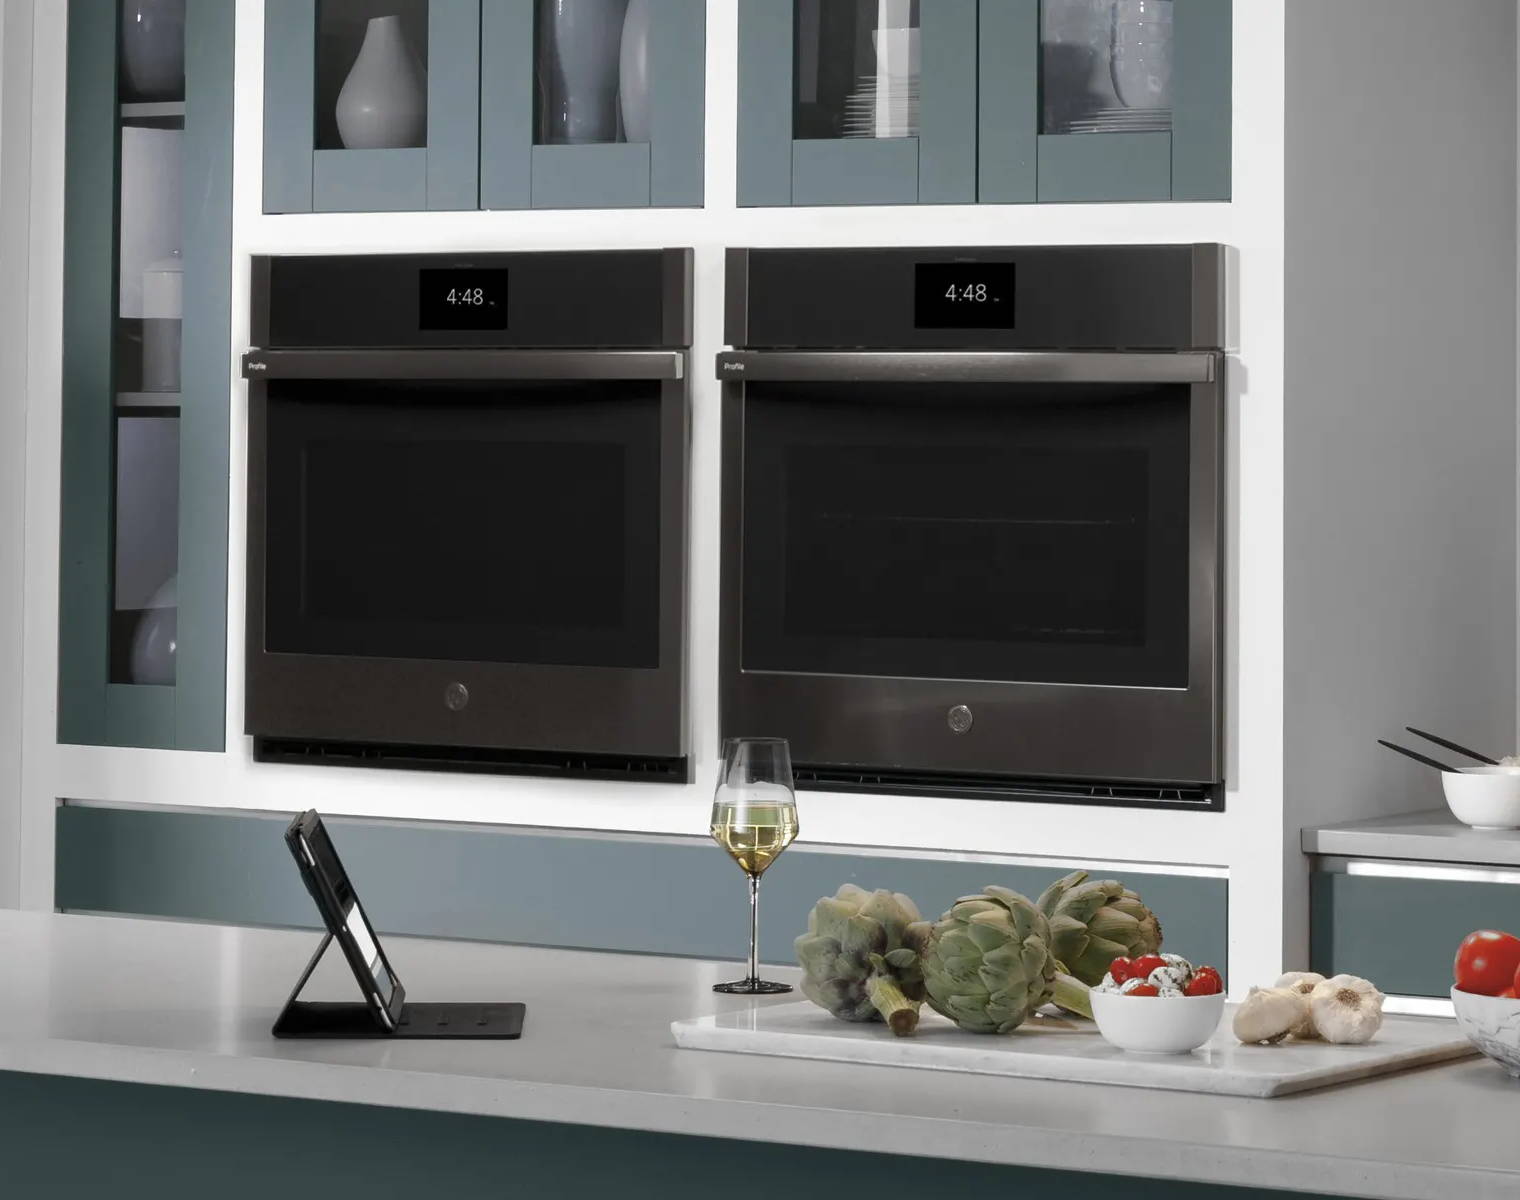 GE Profile Smart Wall Oven Kitchen